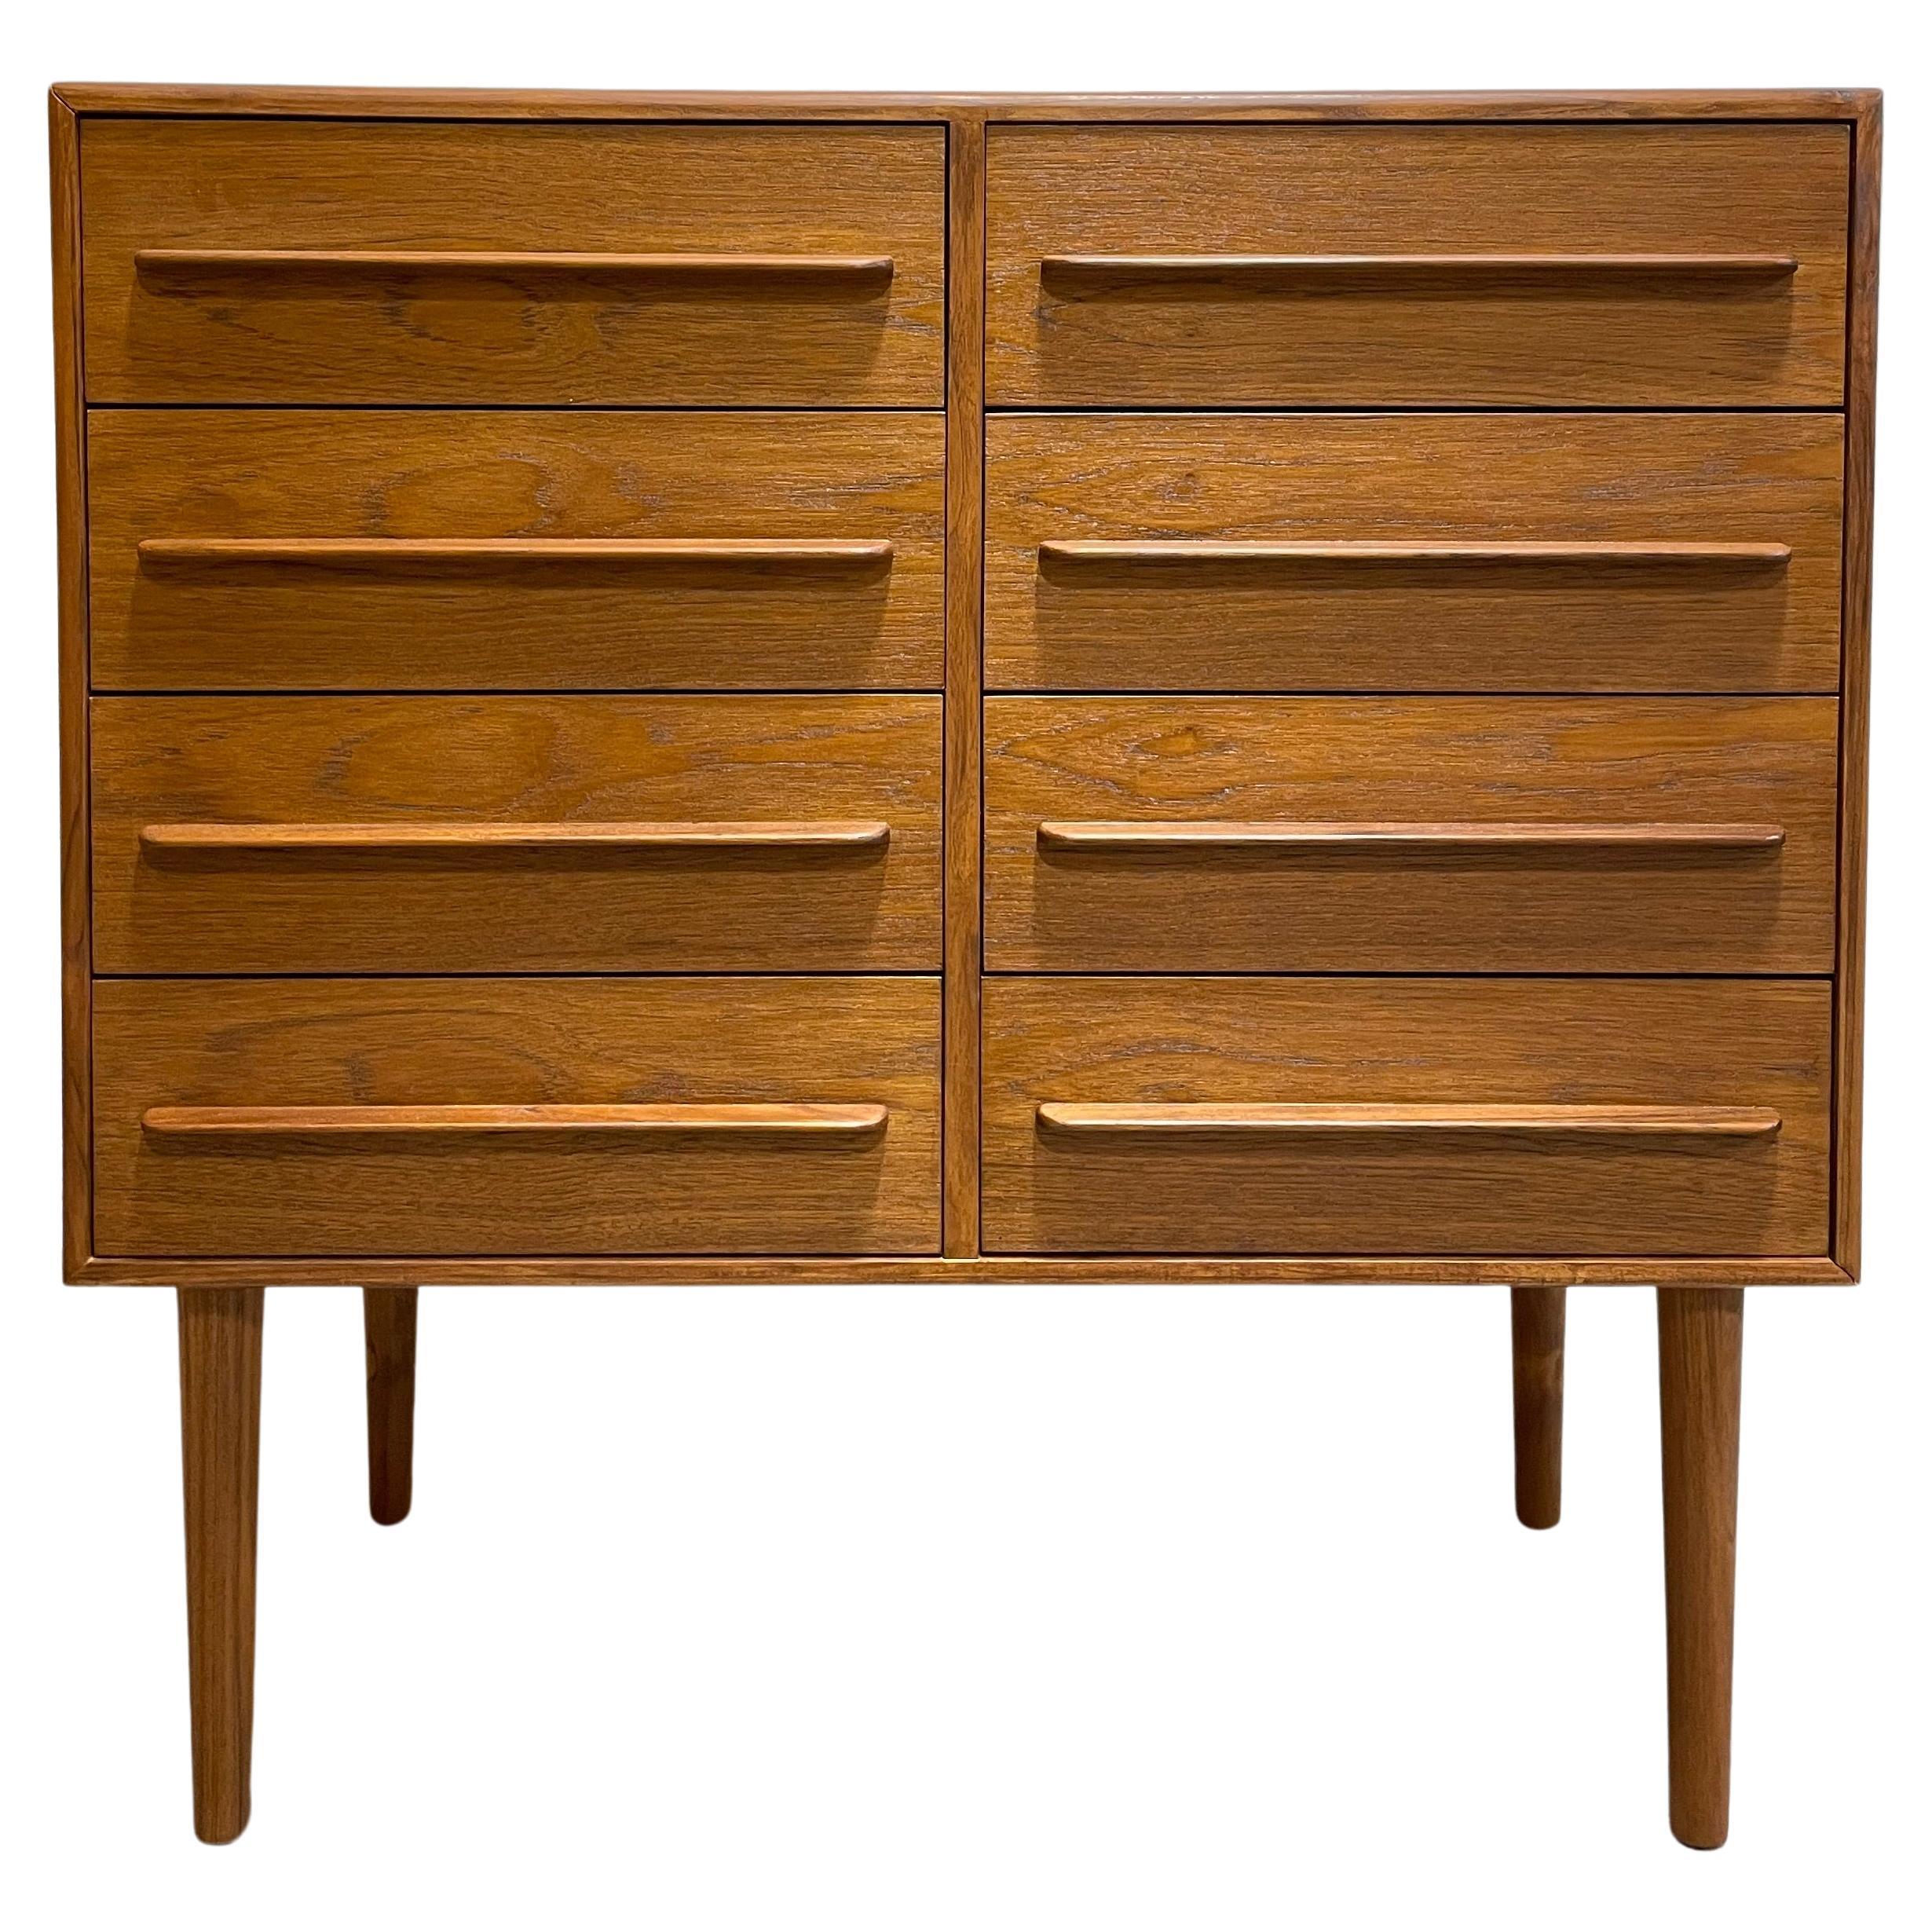 Exceptional Mid-Century Modern styled Teak Handmade dresser with eight drawers. Knife edge drawer pulls and long tapered legs. Perfect as a bedroom dresser, nursery or entryway cabinet. Finished back.